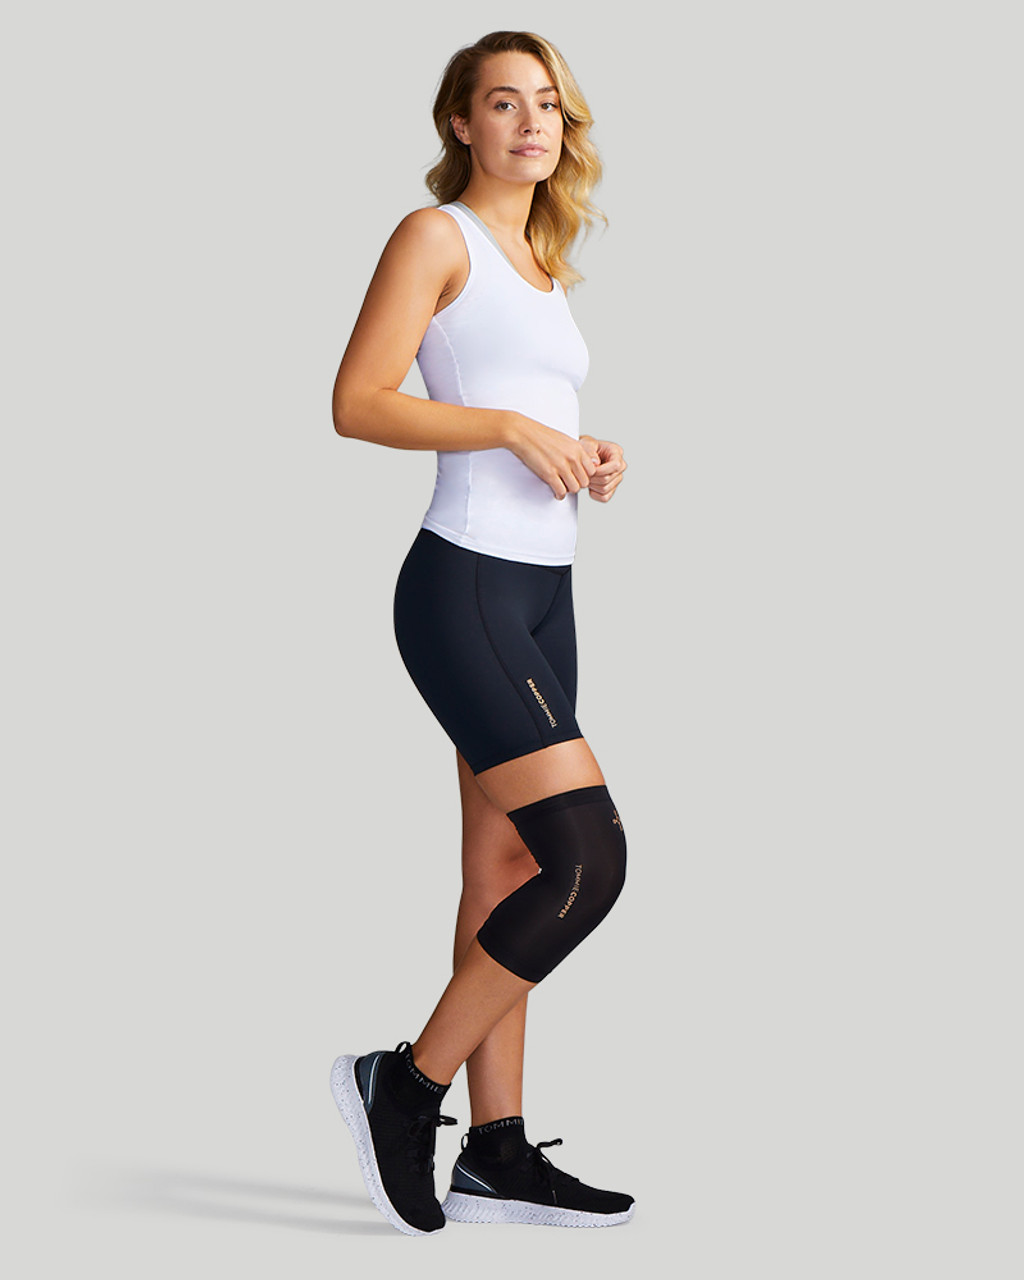 Infrared Knee Brace, All-Day Compression